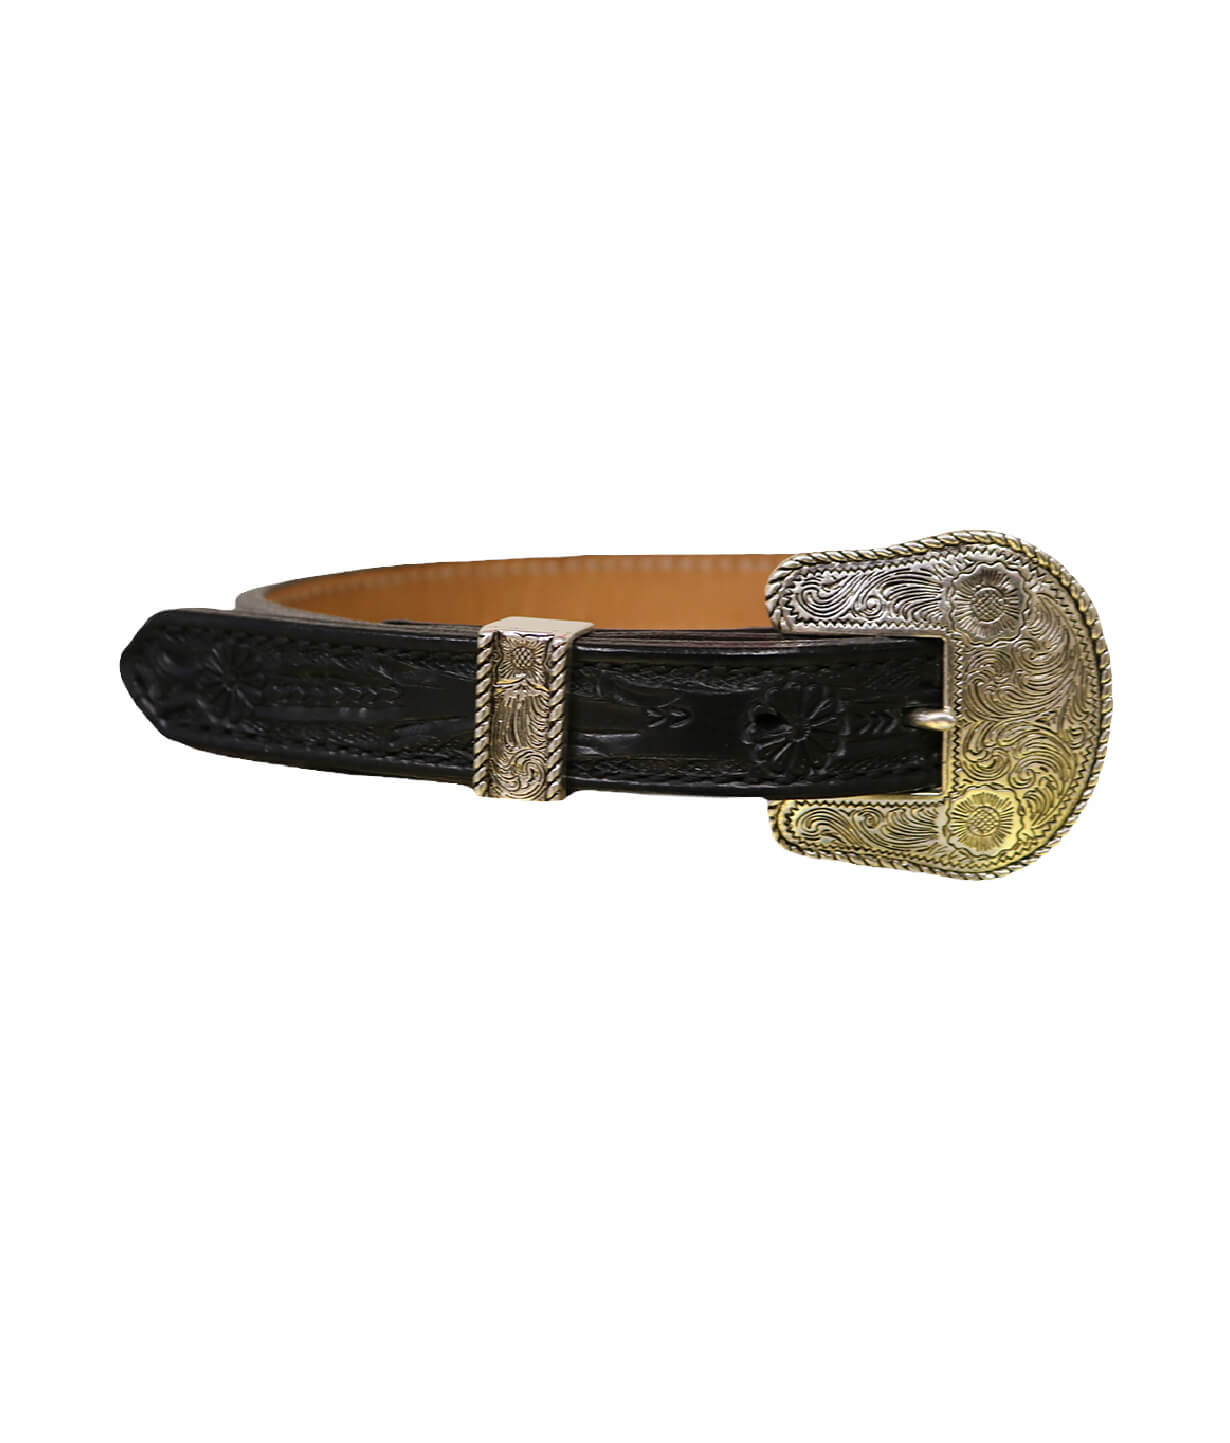 This is our kid's STRAIGHT black leather belt with mini daisy tooling. It comes with a silver belt buckle and silver loop.